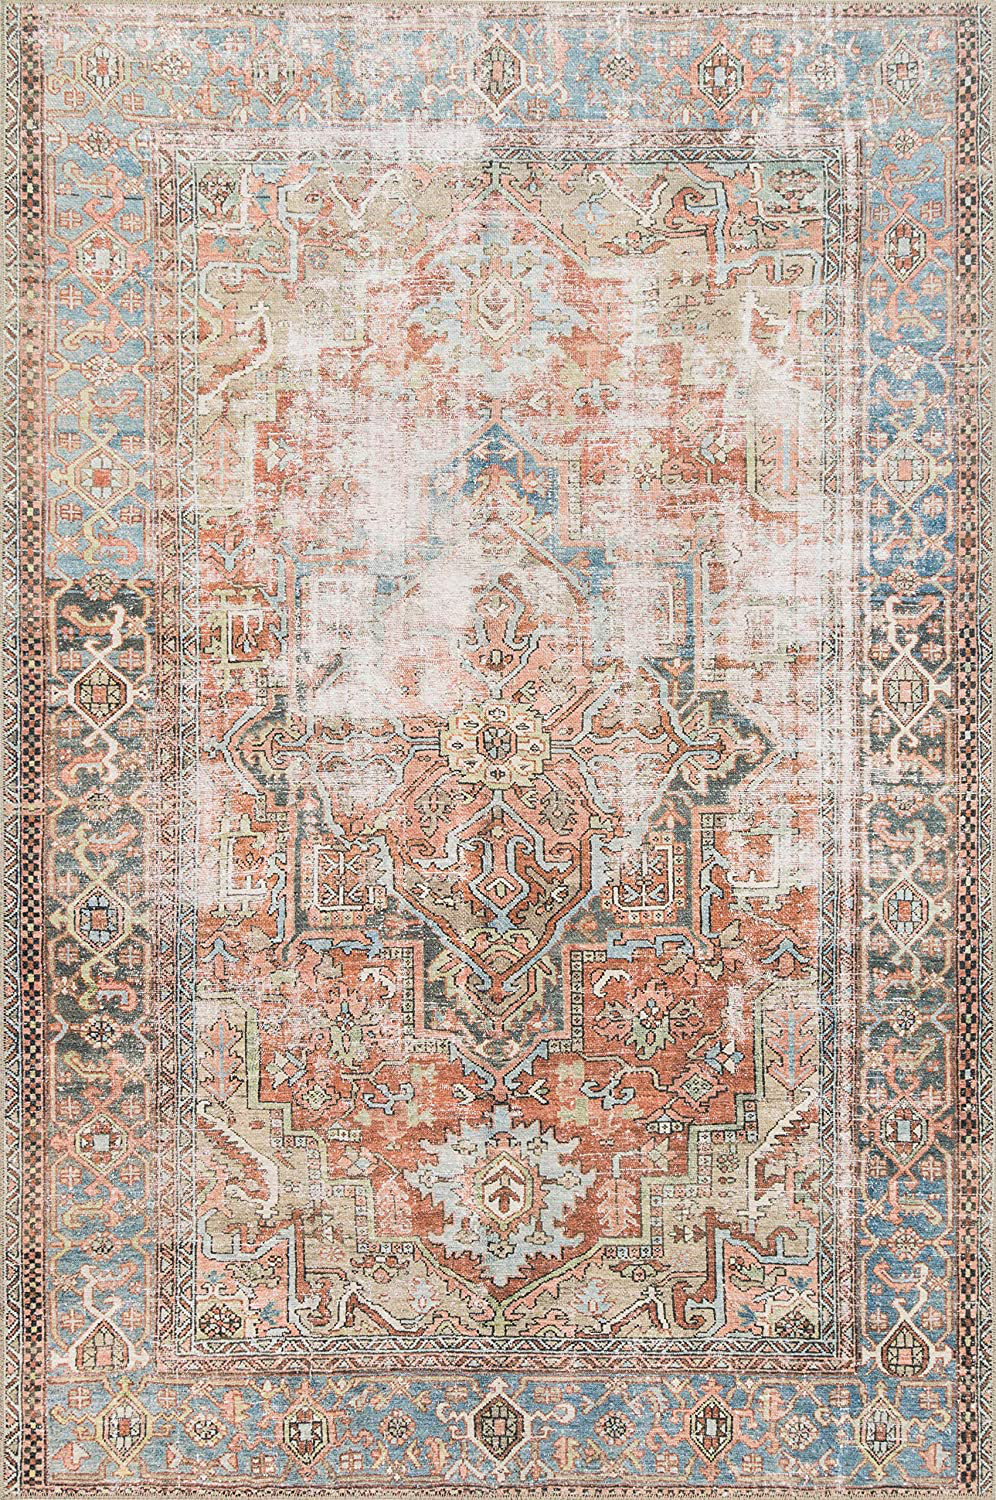 Loloi Loren Collection Vintage Printed Persian Area Rug 1'-6" x 1'-6" Square Swatch Brick/Midnight